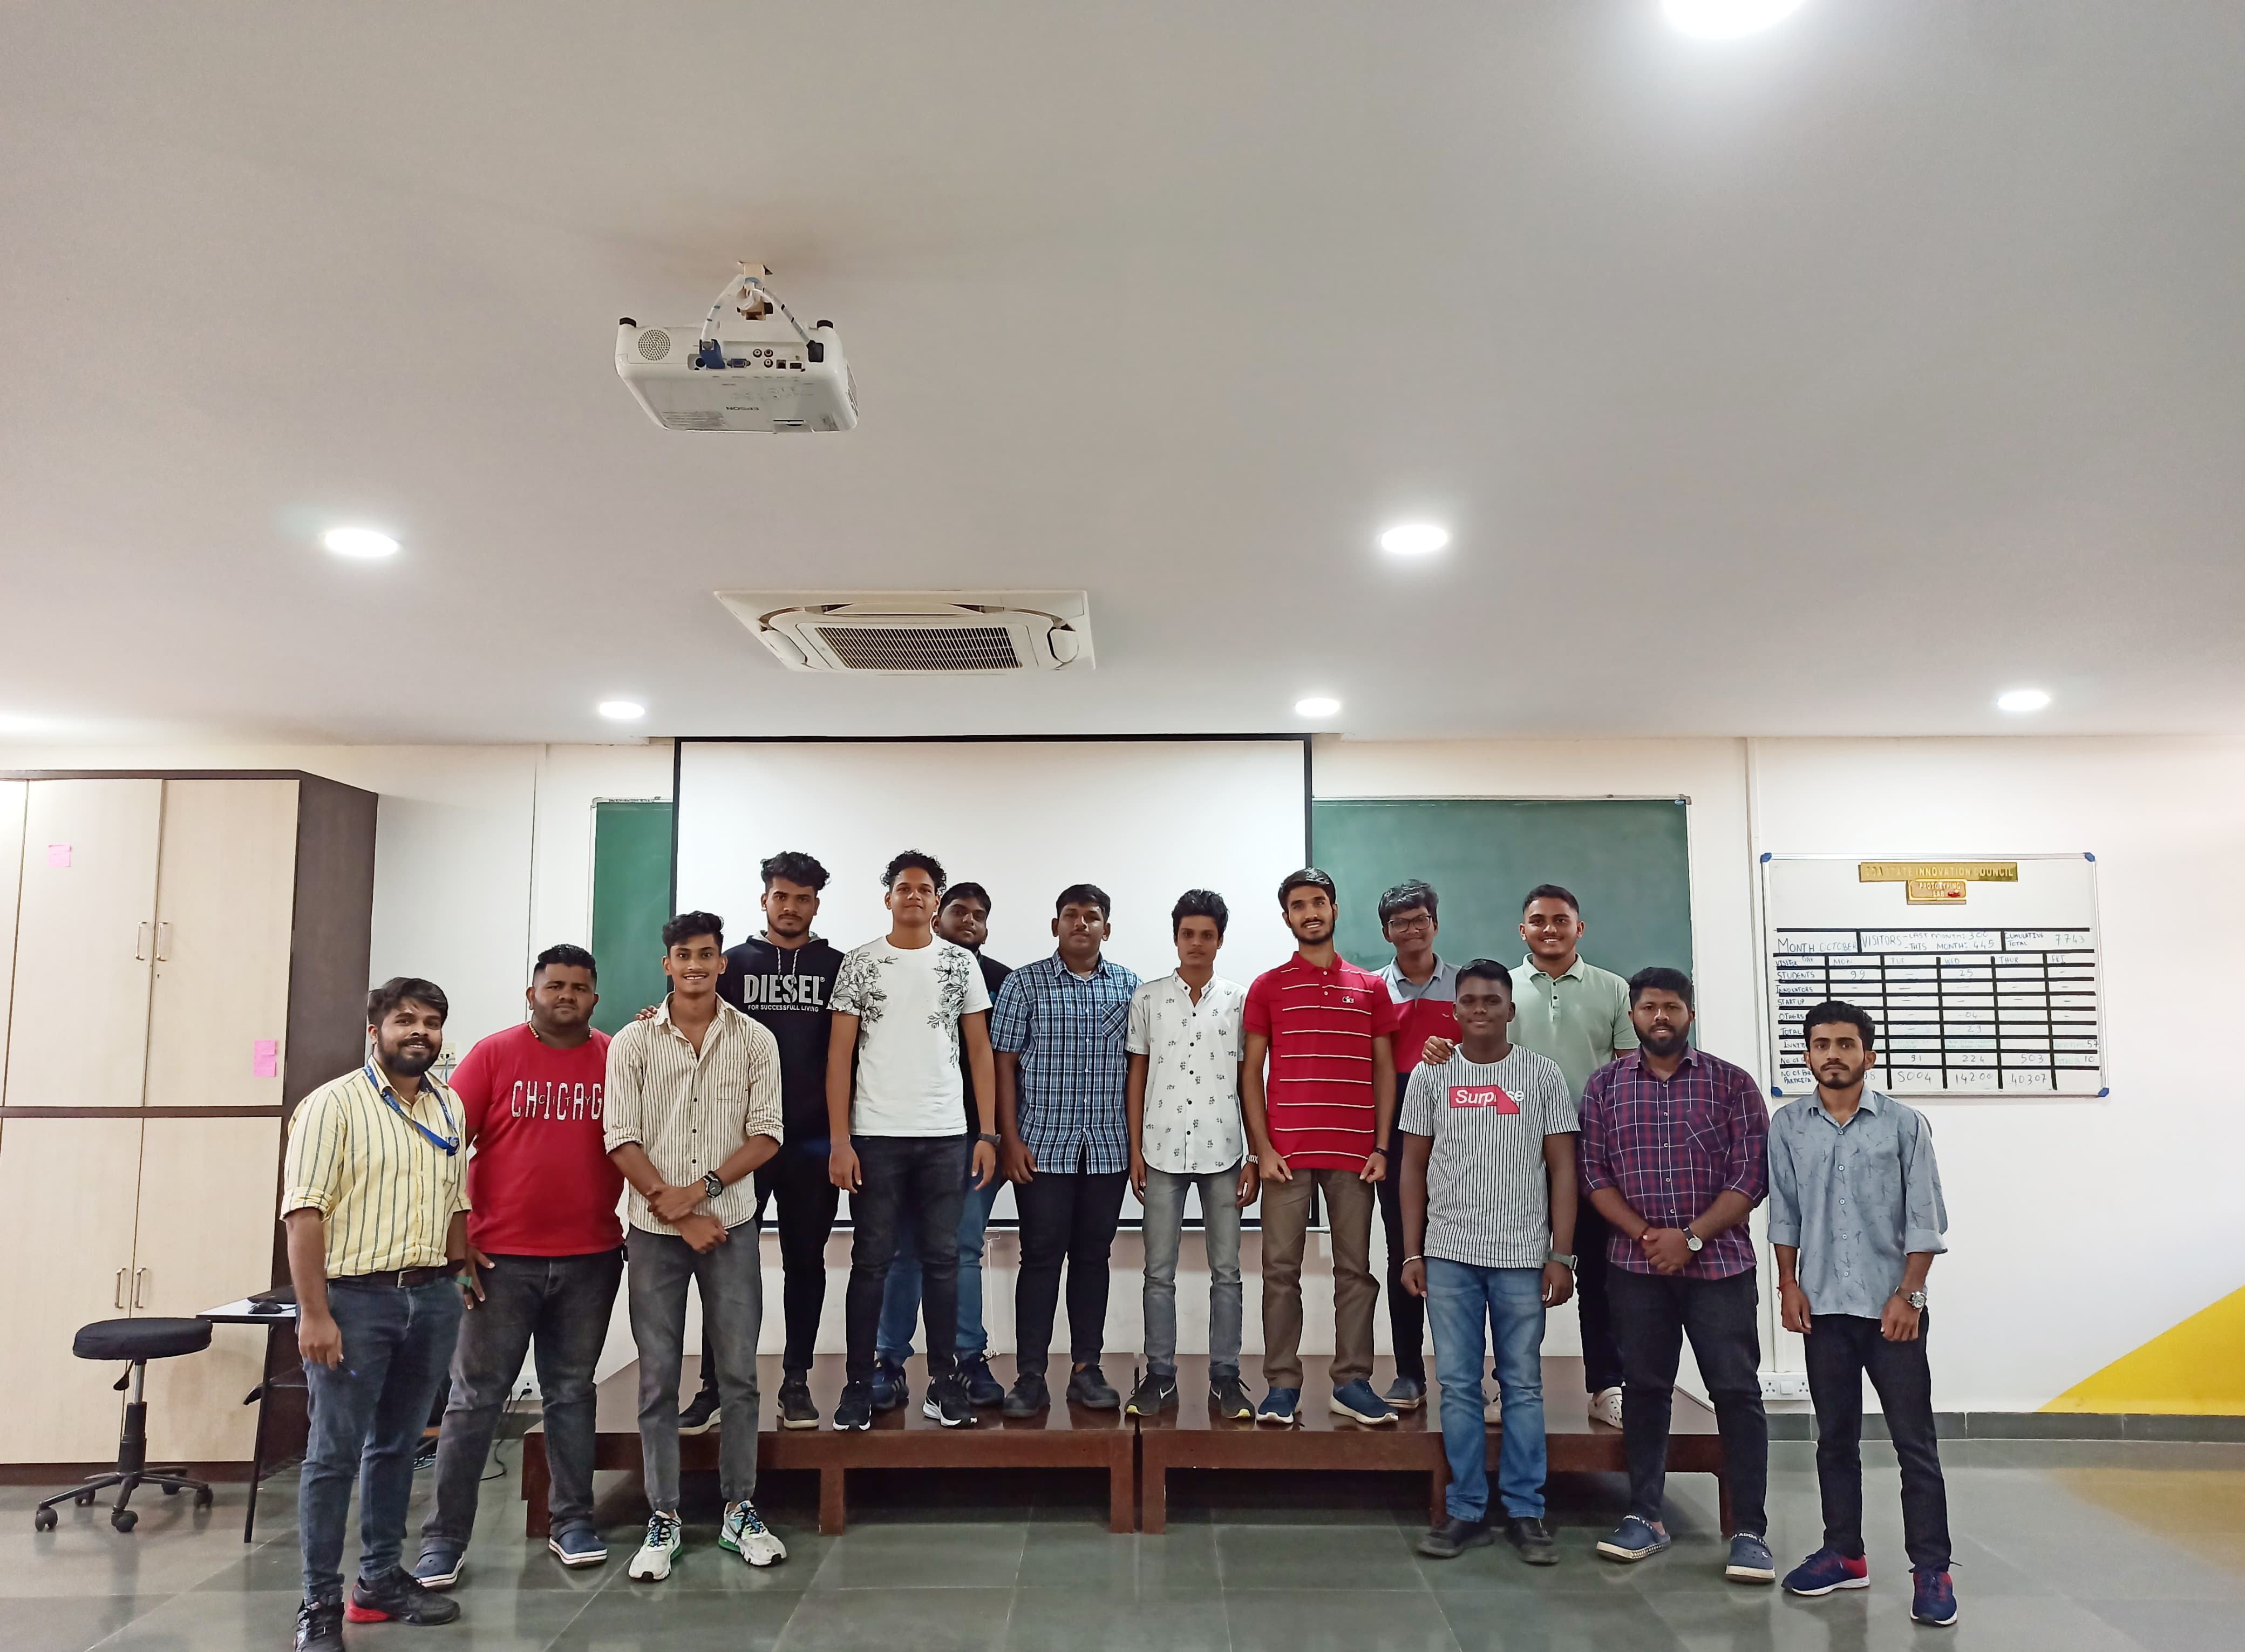 3D printing and Laser cutting Workshop for the students of  Don Bosco College of Engineering, Fatorda-Goa.